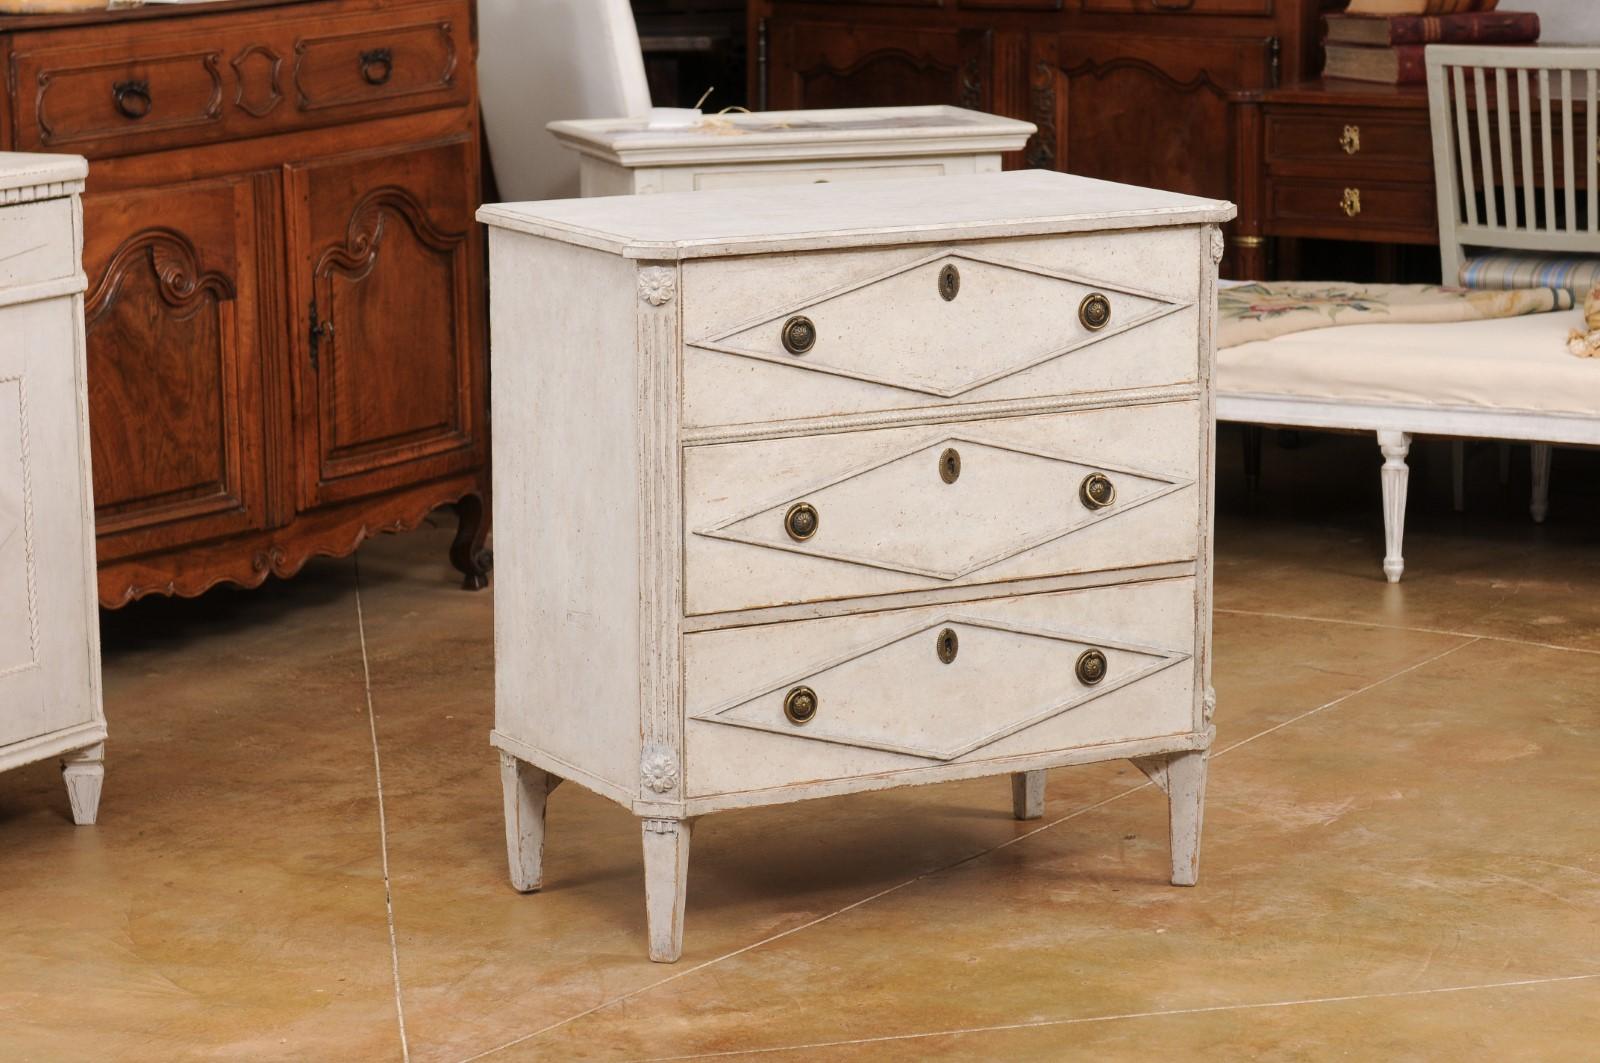 A Swedish Gustavian style painted wood chest from the early 20th century with three drawers, carved diamond motifs, fluted side posts, carved rosettes and tapered feet. Created in Sweden during the early years of the 20th century, this painted wood